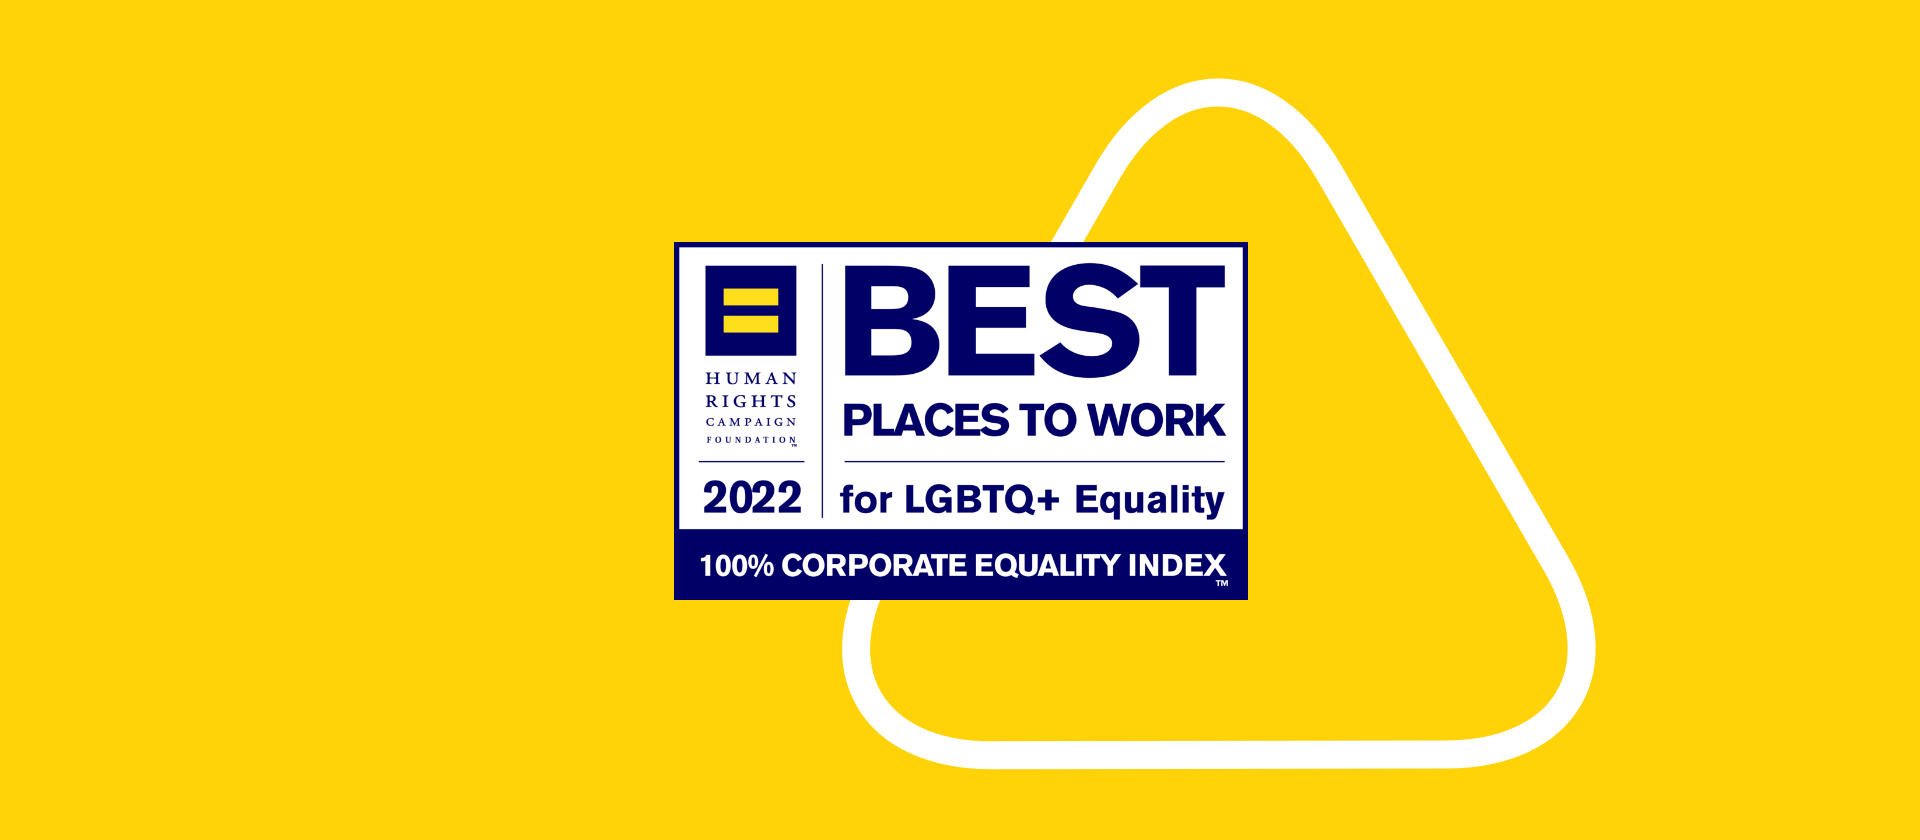 Avery Dennison Earns Top Score on HRC Foundation's 2022 Corporate Equality Index, Ranks as a Best Place to Work for LGBTQ+ Equality